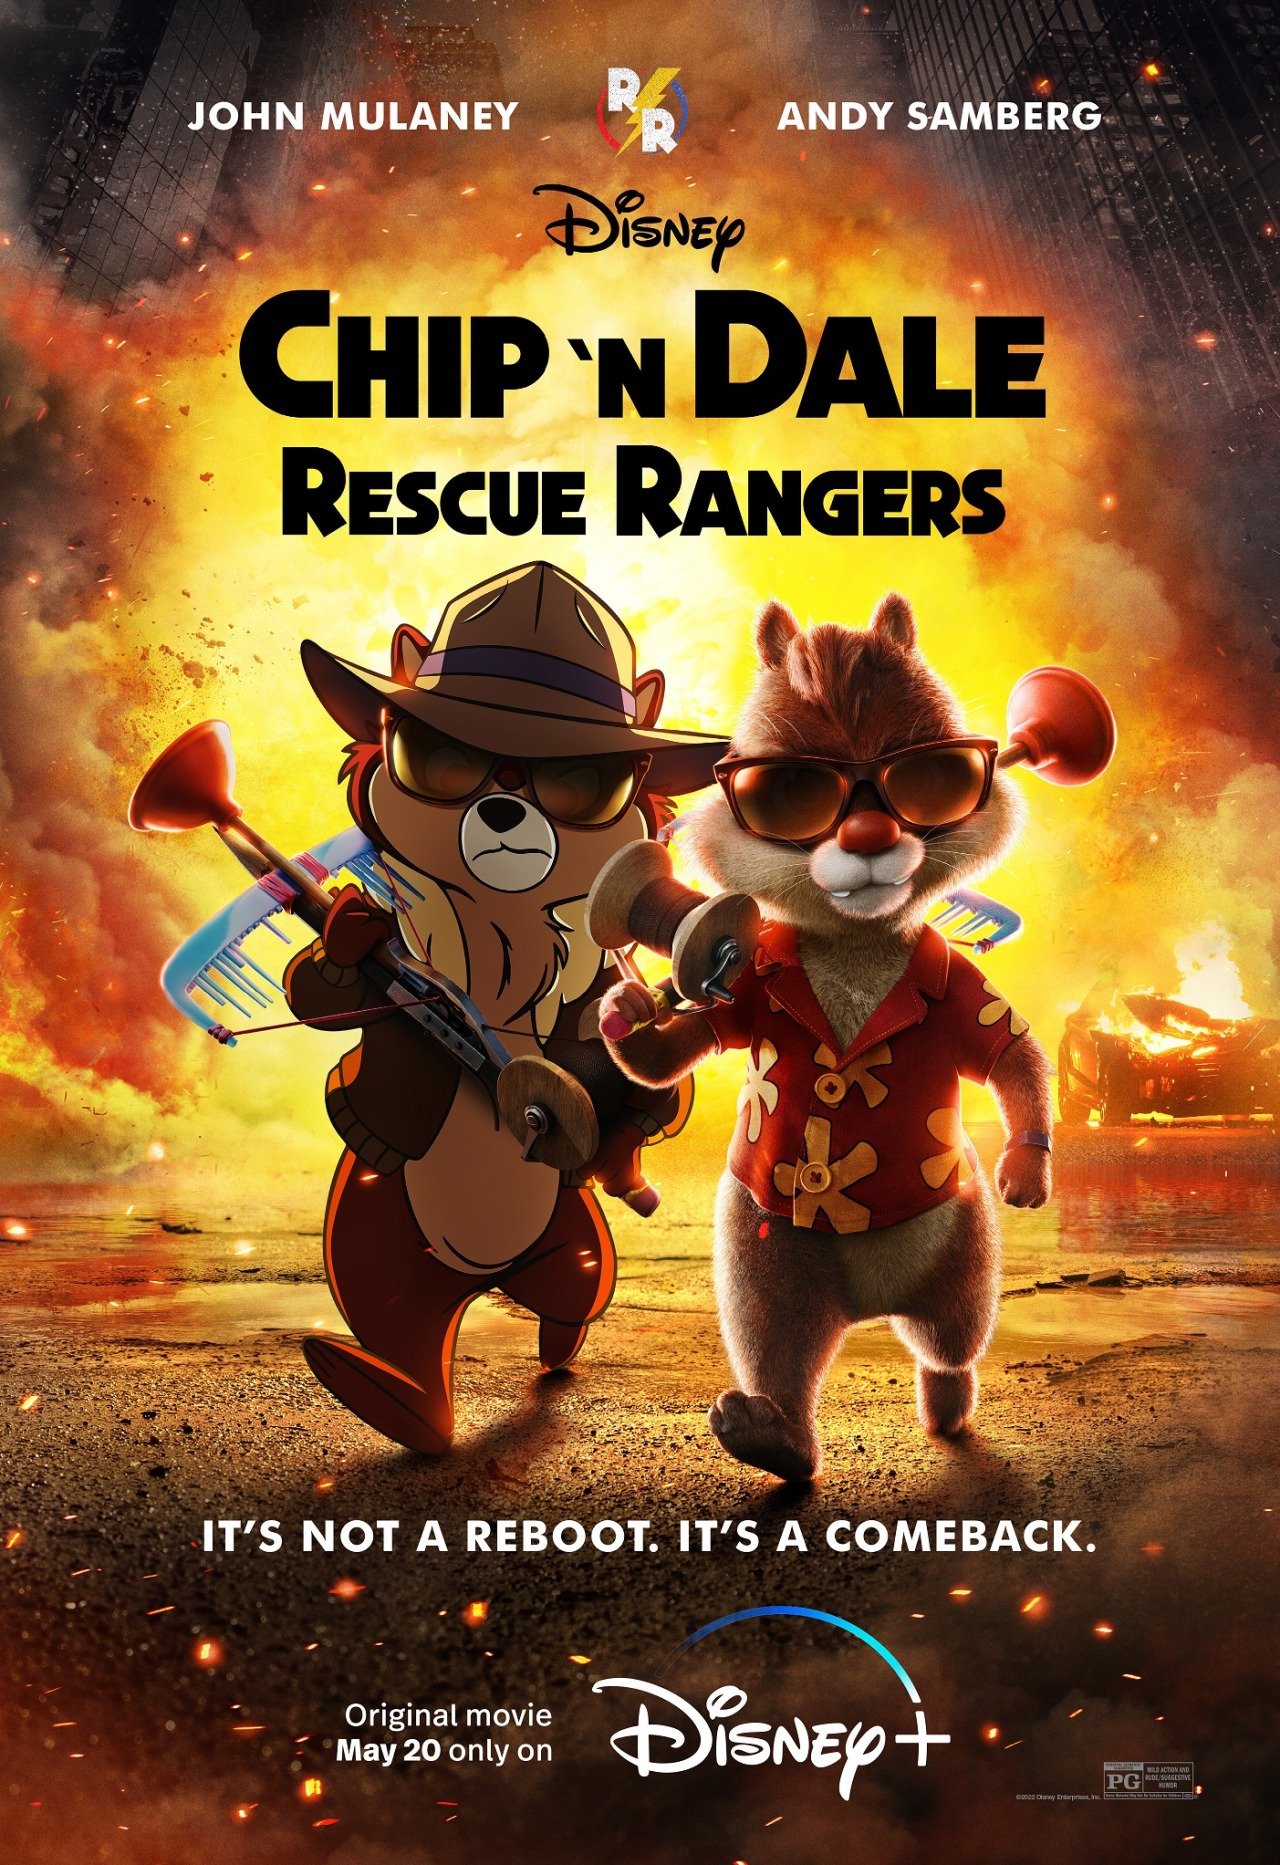 I watched the Chip ’n Dale Rescue Rangers Movie. My thoughts?As a Chip n Dale Movie, I think its okay at best. As a Rescue Rangers Movie? Its pretty bad.  It makes me glad that DuckTales 2017 turned out as good as it did. That show was made by people who loved the Disney Afternoon cartoons, and tried to do it some justice for the new generation. This one feels like the people here wanted to make Roger Rabbit 2 instead and simply chose a nostalgic property because reboots are the cool new thing.When I first heard of the movie being made, I was expecting The Rescue Rangers take on Fat Cat/Nimnul/an original villain in their most dangerous scheme yet!
Or The Rescue Rangers have gone their separate ways, but join together once more to take on a new threat!
Or This is a new origin story for the how Rescue Rangers came together to stop Fat Cat!
Not Who Framed Roger Rabbit 2: Starring Chip n Dale from the Rescue Rangers!While Montys kidnapping does drive the plot, Gadget and Zipper only help out at the very end of the movie where they fly Dale to his destination, and even then they remain uninvolved in the final conflict! Like, you could’ve replaced them with almost anyone else, and things still would’ve been the same. If this is supposed to be a “Rescue Rangers Movie,” why not have Gadget and Zipper team up with the duo to help find Monty? You mean to tell me Monty called in Chip n’ Dale for help, but not Gadget and his best pal Zipper?Heck, why not have Fat Cat and Nimnul help out as well? Sure, you could argue “they’re evil, they would never help those Rescue Rodents,“ but as previously mentioned, in this world, The Rescue Rangers are actors.In an early scene in the movie, both villains seem to be enjoying making the episodes alongside the heroes. I’m sure they would be more than happy to help them find one of their missing co-stars. Imagine Ellie going “You guys are helping? Aren’t you villains?“ and Fat Cat snarking back at her “Uh, hello? We’re actors. That was only in the show,“ with Nimnul following up with “We’re really nice once you get to know us,” or something like that.Speaking of which... Gadget and Zipper? Really? This pairing really feels like it’s a spit on the fans than anything. I’d rather Chip/Gadget, Dale/Gadget, or just Gadget living by herself than that. (And I’m not even a massive shipper in the Rescue Rangers fandom)I’d probably be less upset by that if they weren’t so selective on what Rescue Rangers lore they brought back. Like, Monty’s obsession with cheese wasn’t something that Monty “the character” was obsessed with. Monty “the actor” is also addicted to cheese, and it’s treated like a drug addiction. (And nobody in-universe cares that they wrote his addiction into their script because...?)Heck, Gadget herself comments that “I guess my character from the old show and my character in real life are basically exactly the same!“ I might be remembering wrong, but didn’t Gadget sometimes display an interest in Chip, despite her being rather oblivious to love?Heck, Zipper was shown being interested in Queenie the Queen Bee in one episode. Seems to me like they deliberately chose to ignore these two facts simply to spite the original fans.And then theres the whole Peter Pan situation.  Even ignoring its very unfortunate ties to the Bobby Driscoll tragedy,  his backstory has a major plothole when Peter encounters one of the Lost  Boys when he and his minions are chasing the   two chipmunks.How did that kid not age a day while Peter did? Never explained.There was that one leak that suggests that PLUTO was intended to be the main villain. And you know what? That might just be the case. When you watch the film with that scrapped plot in mind, you start to notice some things.  Like how our main antagonist Peter - originally “Mean Dean” in the leak -  doesn’t really have a lot of lines of dialogue before he transforms  into that amalgamation of a cartoon, especially compared to the second  antagonist of the film. Heck, Mean Dean may not have even been intended  to be Peter, only for that to change when they rewrote the script! But I  digress...  That being said, there were some enjoyable moments here and there. I even think the flashbacks to Chip n Dales childhood was pretty cute. But its not enough to save the movie for me, and I pray a sequel to this - whether its following Chip n Dale or Darkwing Duck - never happens. If you absolutely have to watch it, then I suggest you “set sails on the high-seas, matey!“ and never look back.It’s true what they say: “Sometimes, some films deserve to slip through the cracks.“ #Chip n Dale Rescue Rangers Movie #TheWispGuys Thoughts#TheWispGuys Reviews